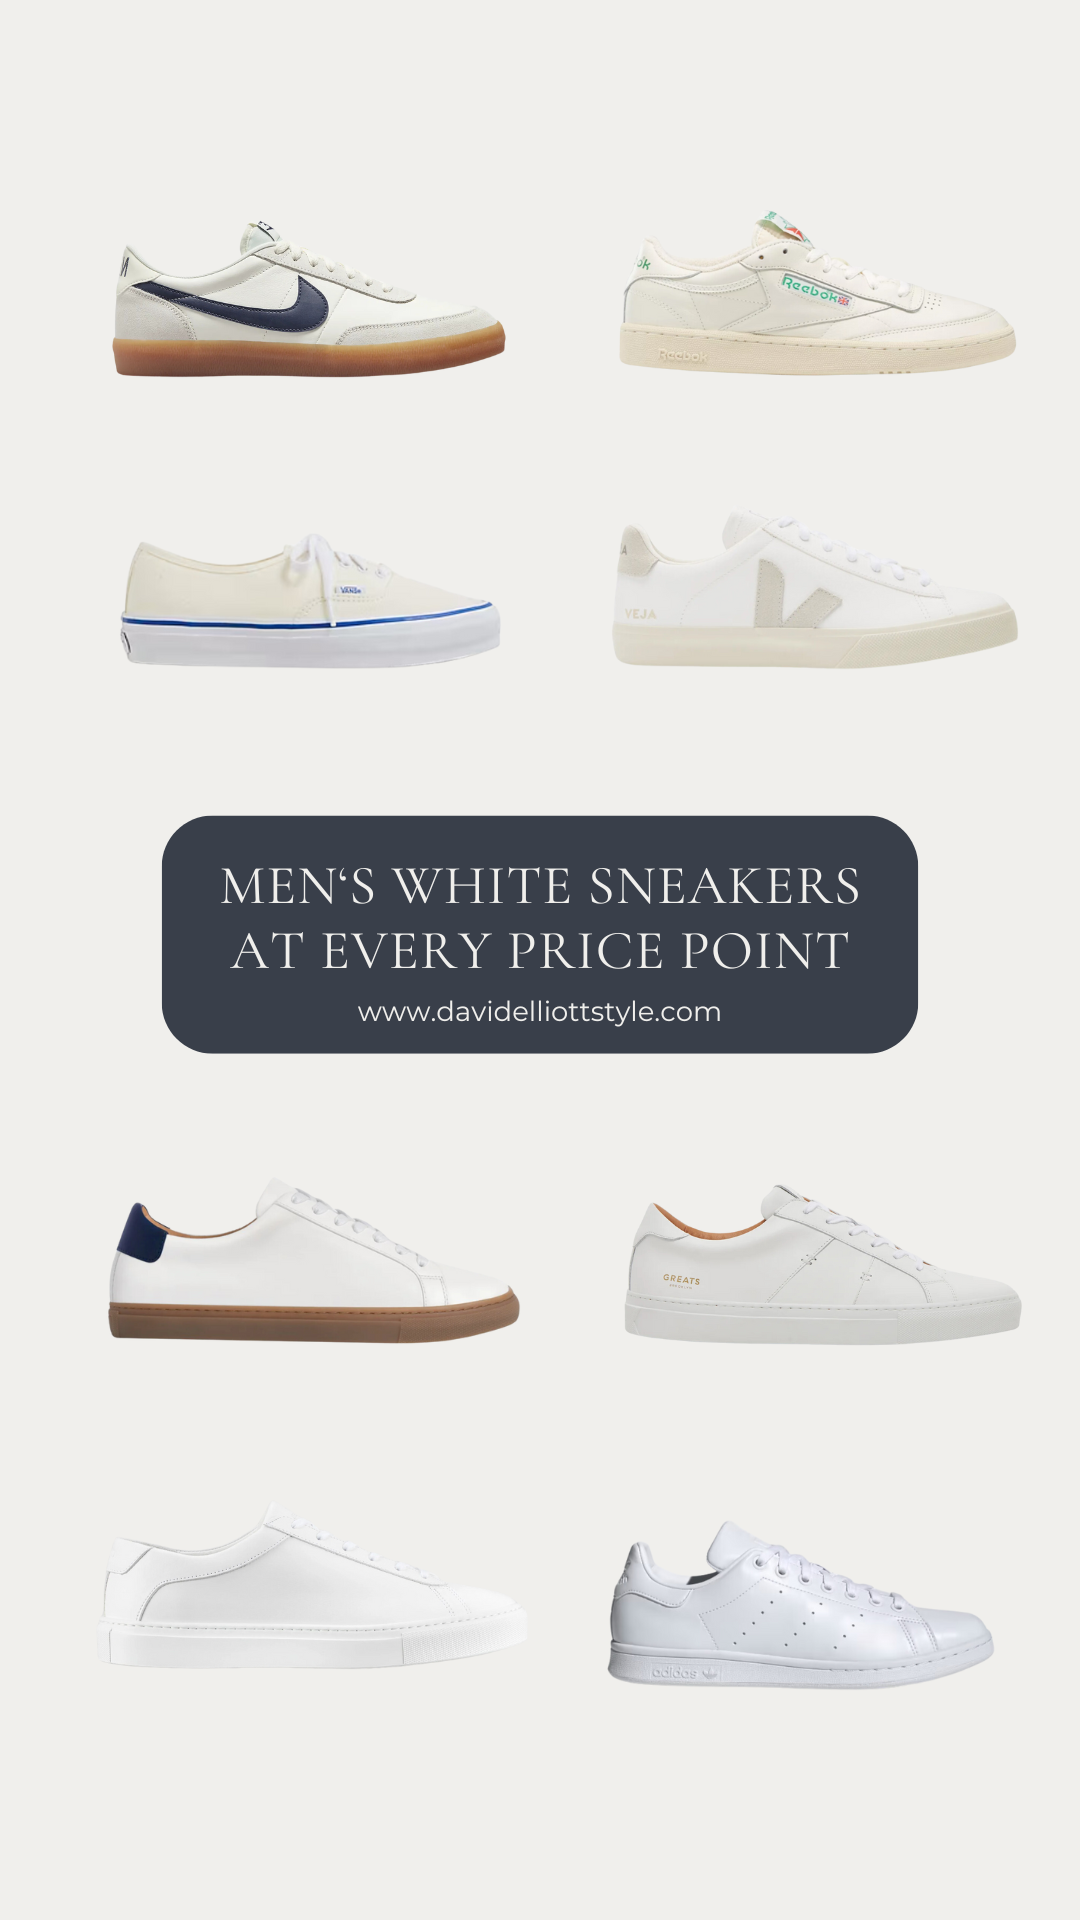 Men's White Sneakers at Every Price Point